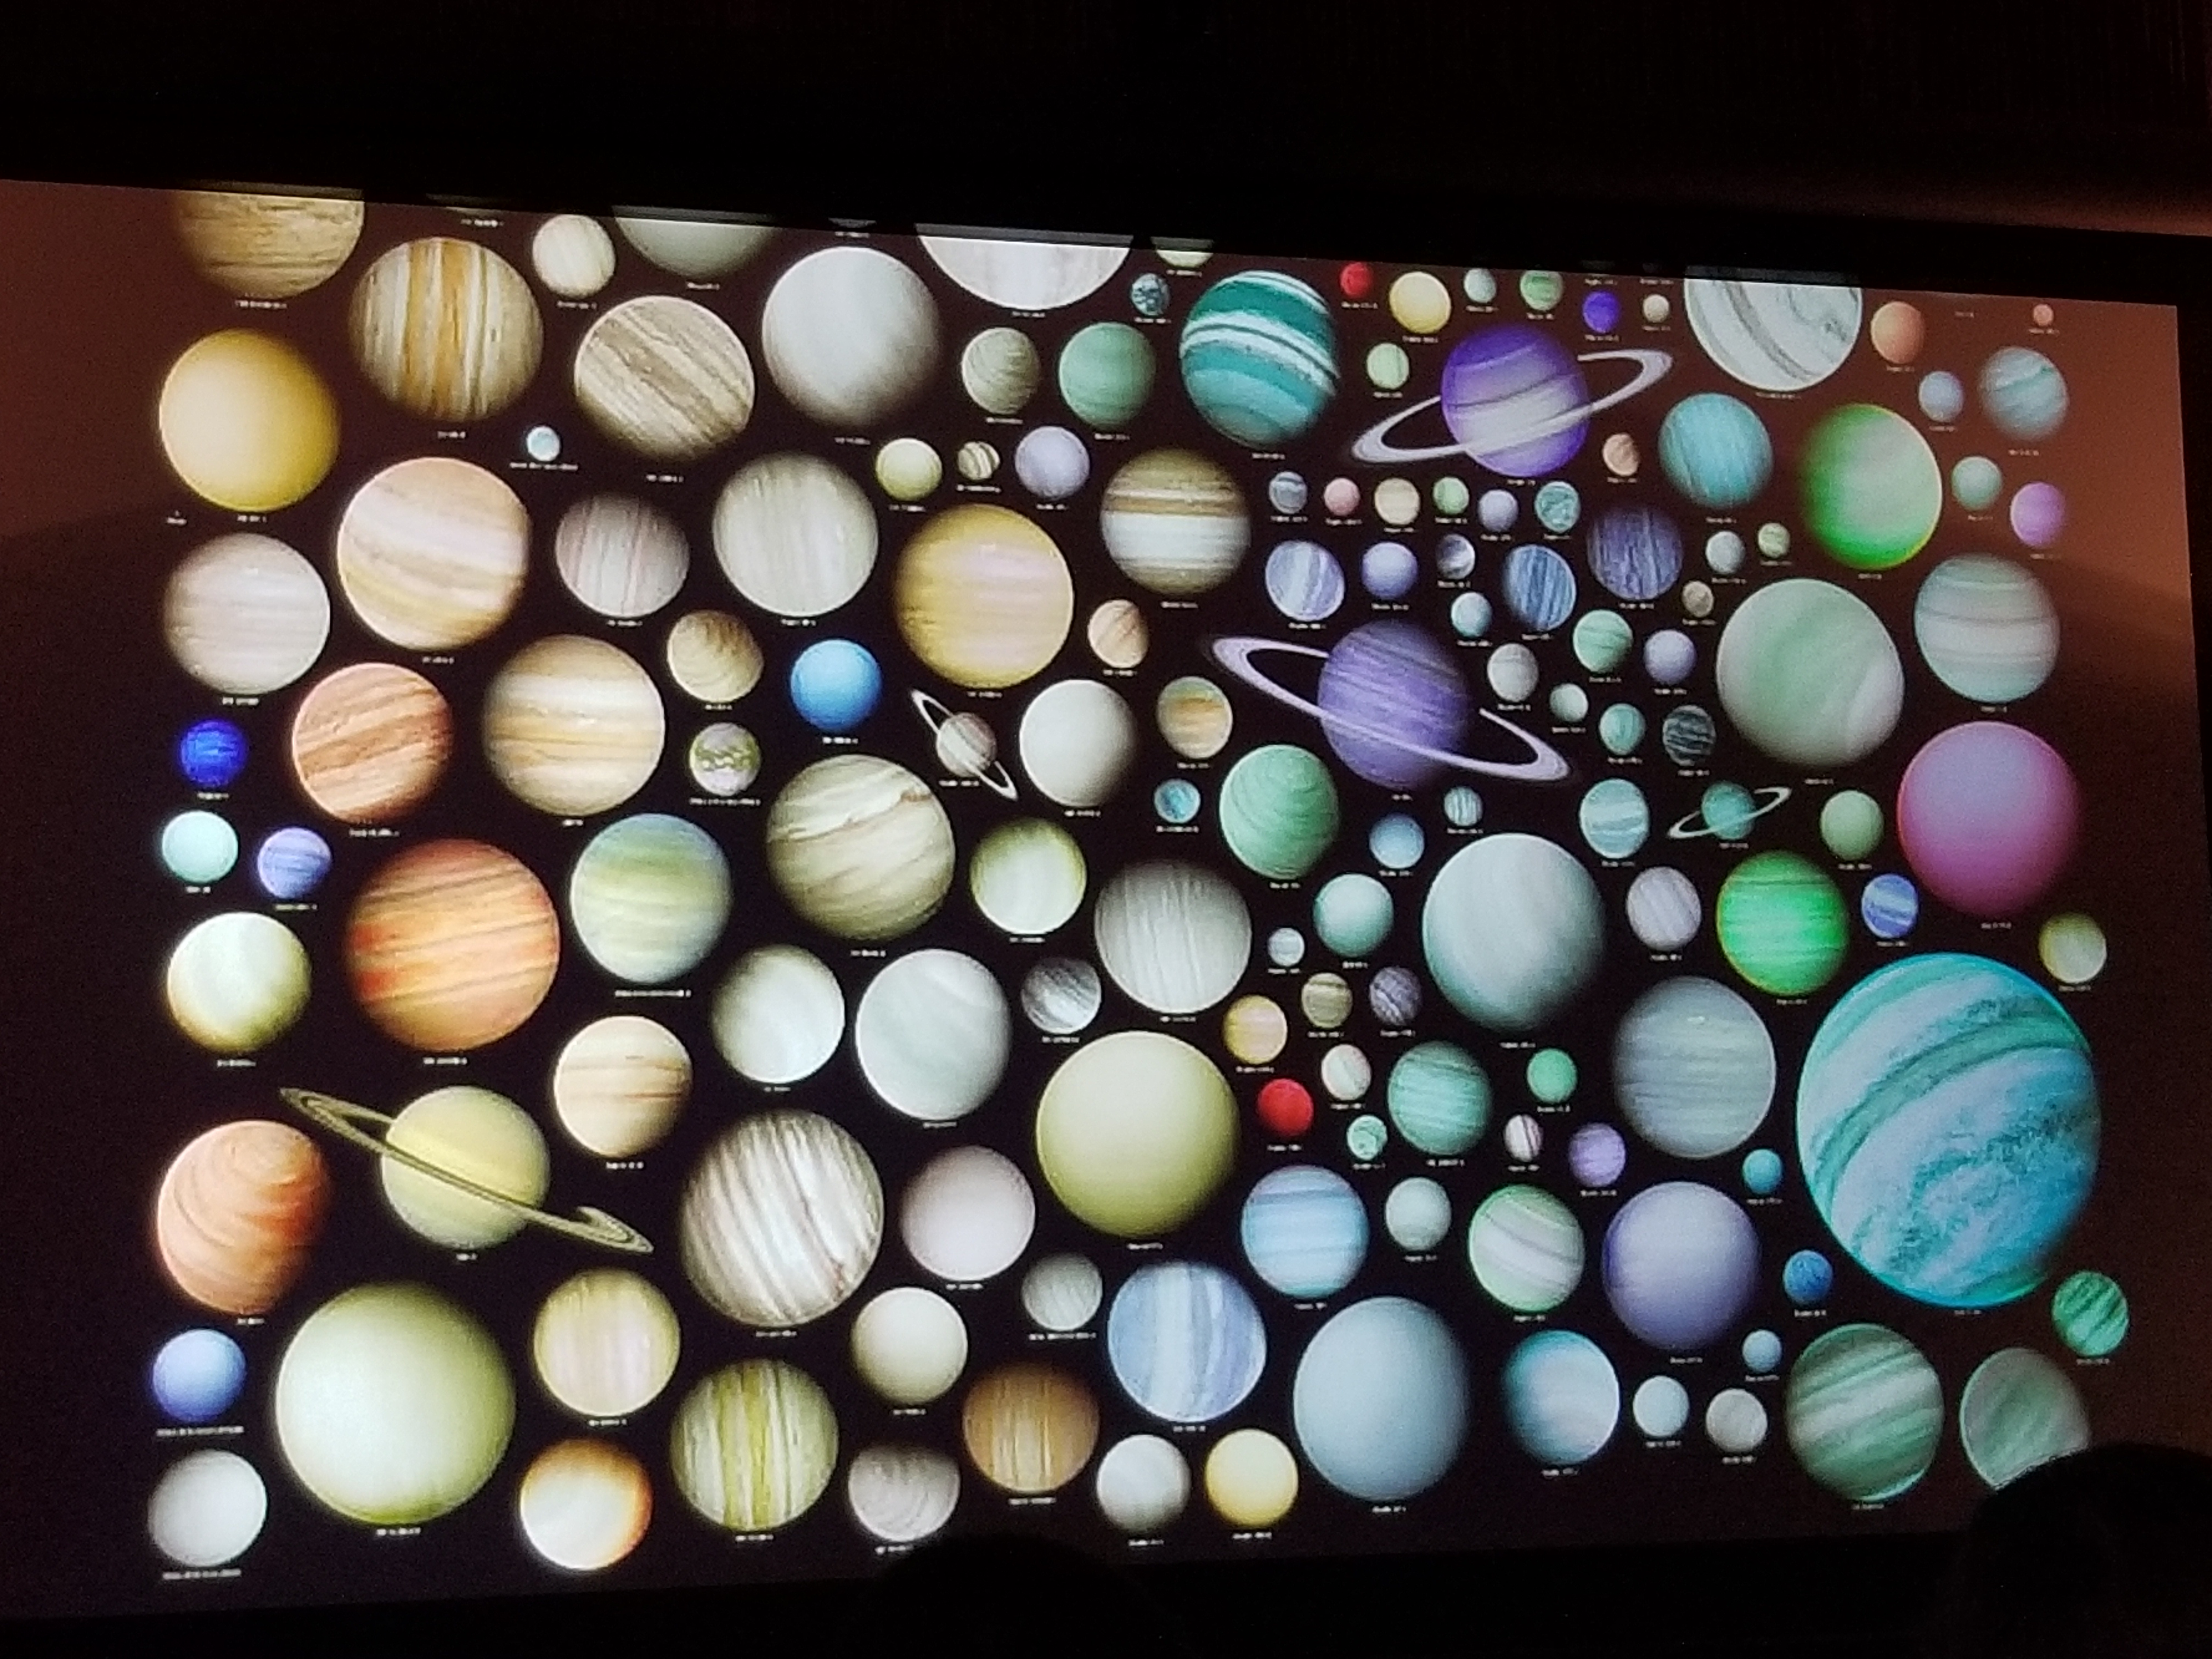 Image of planets at the SETI Institute event, photo by Kenneth Silber